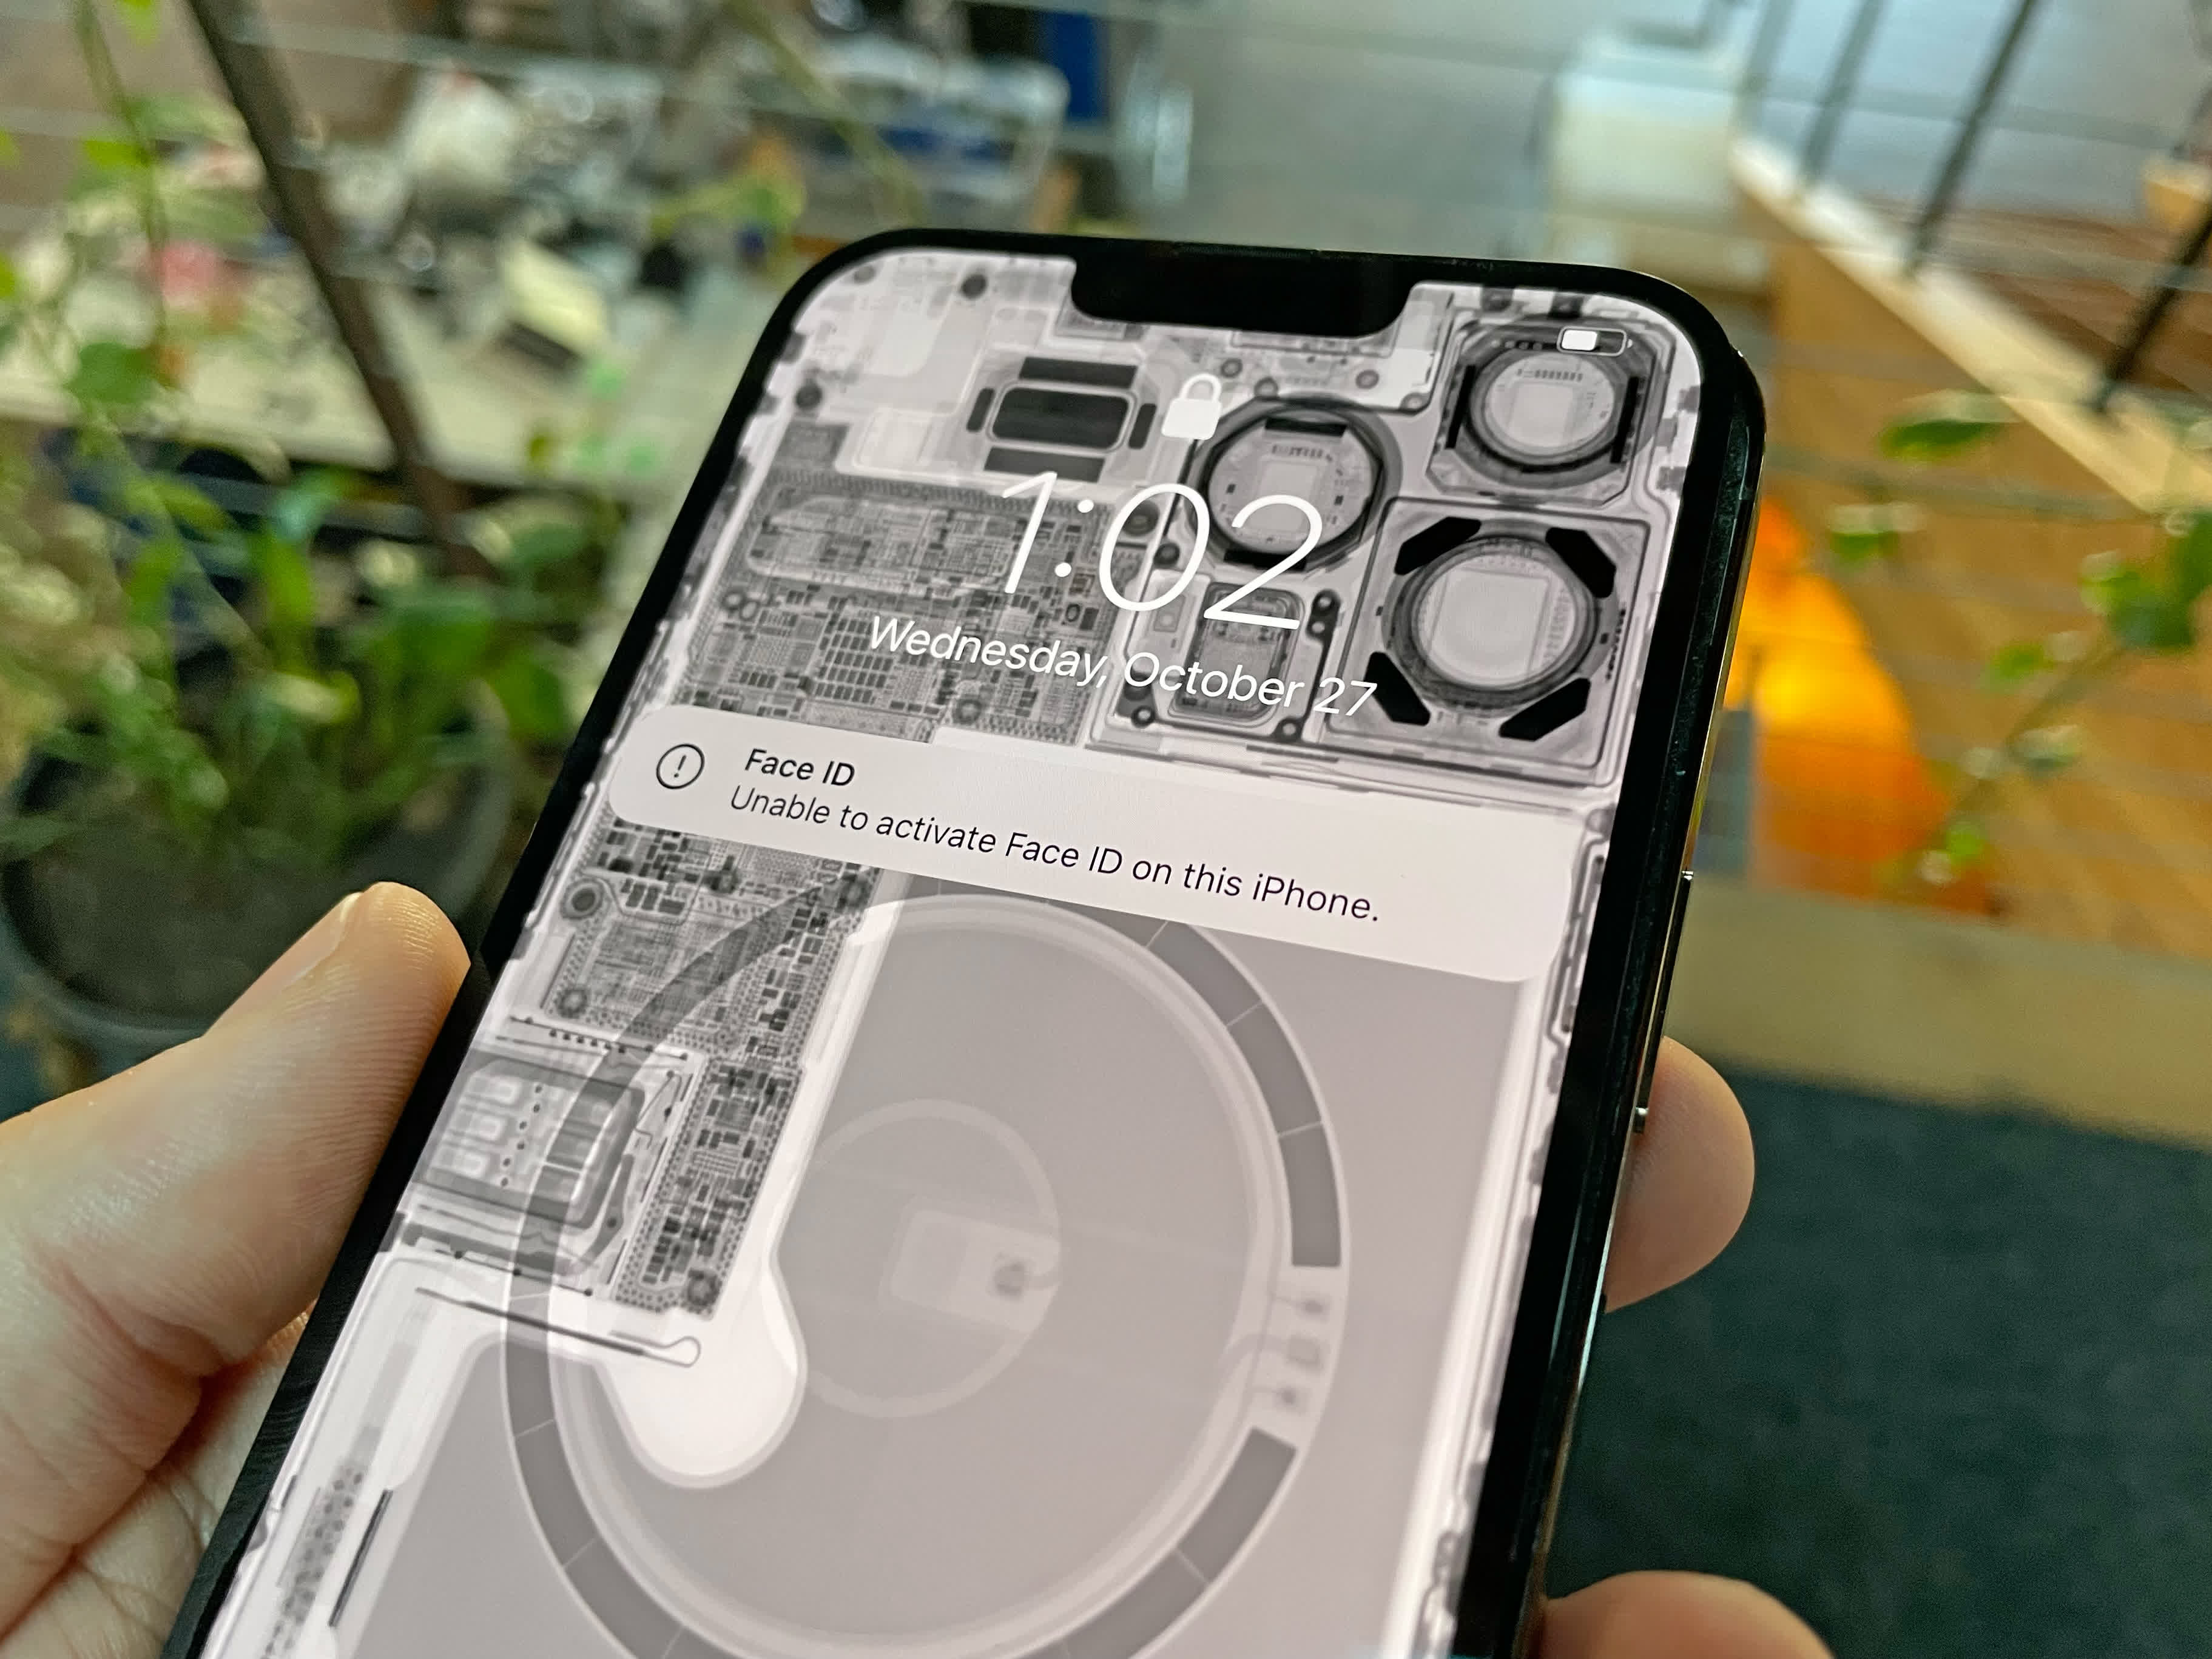 iFixit confirms iPhone 13 display swaps render Face ID unusable